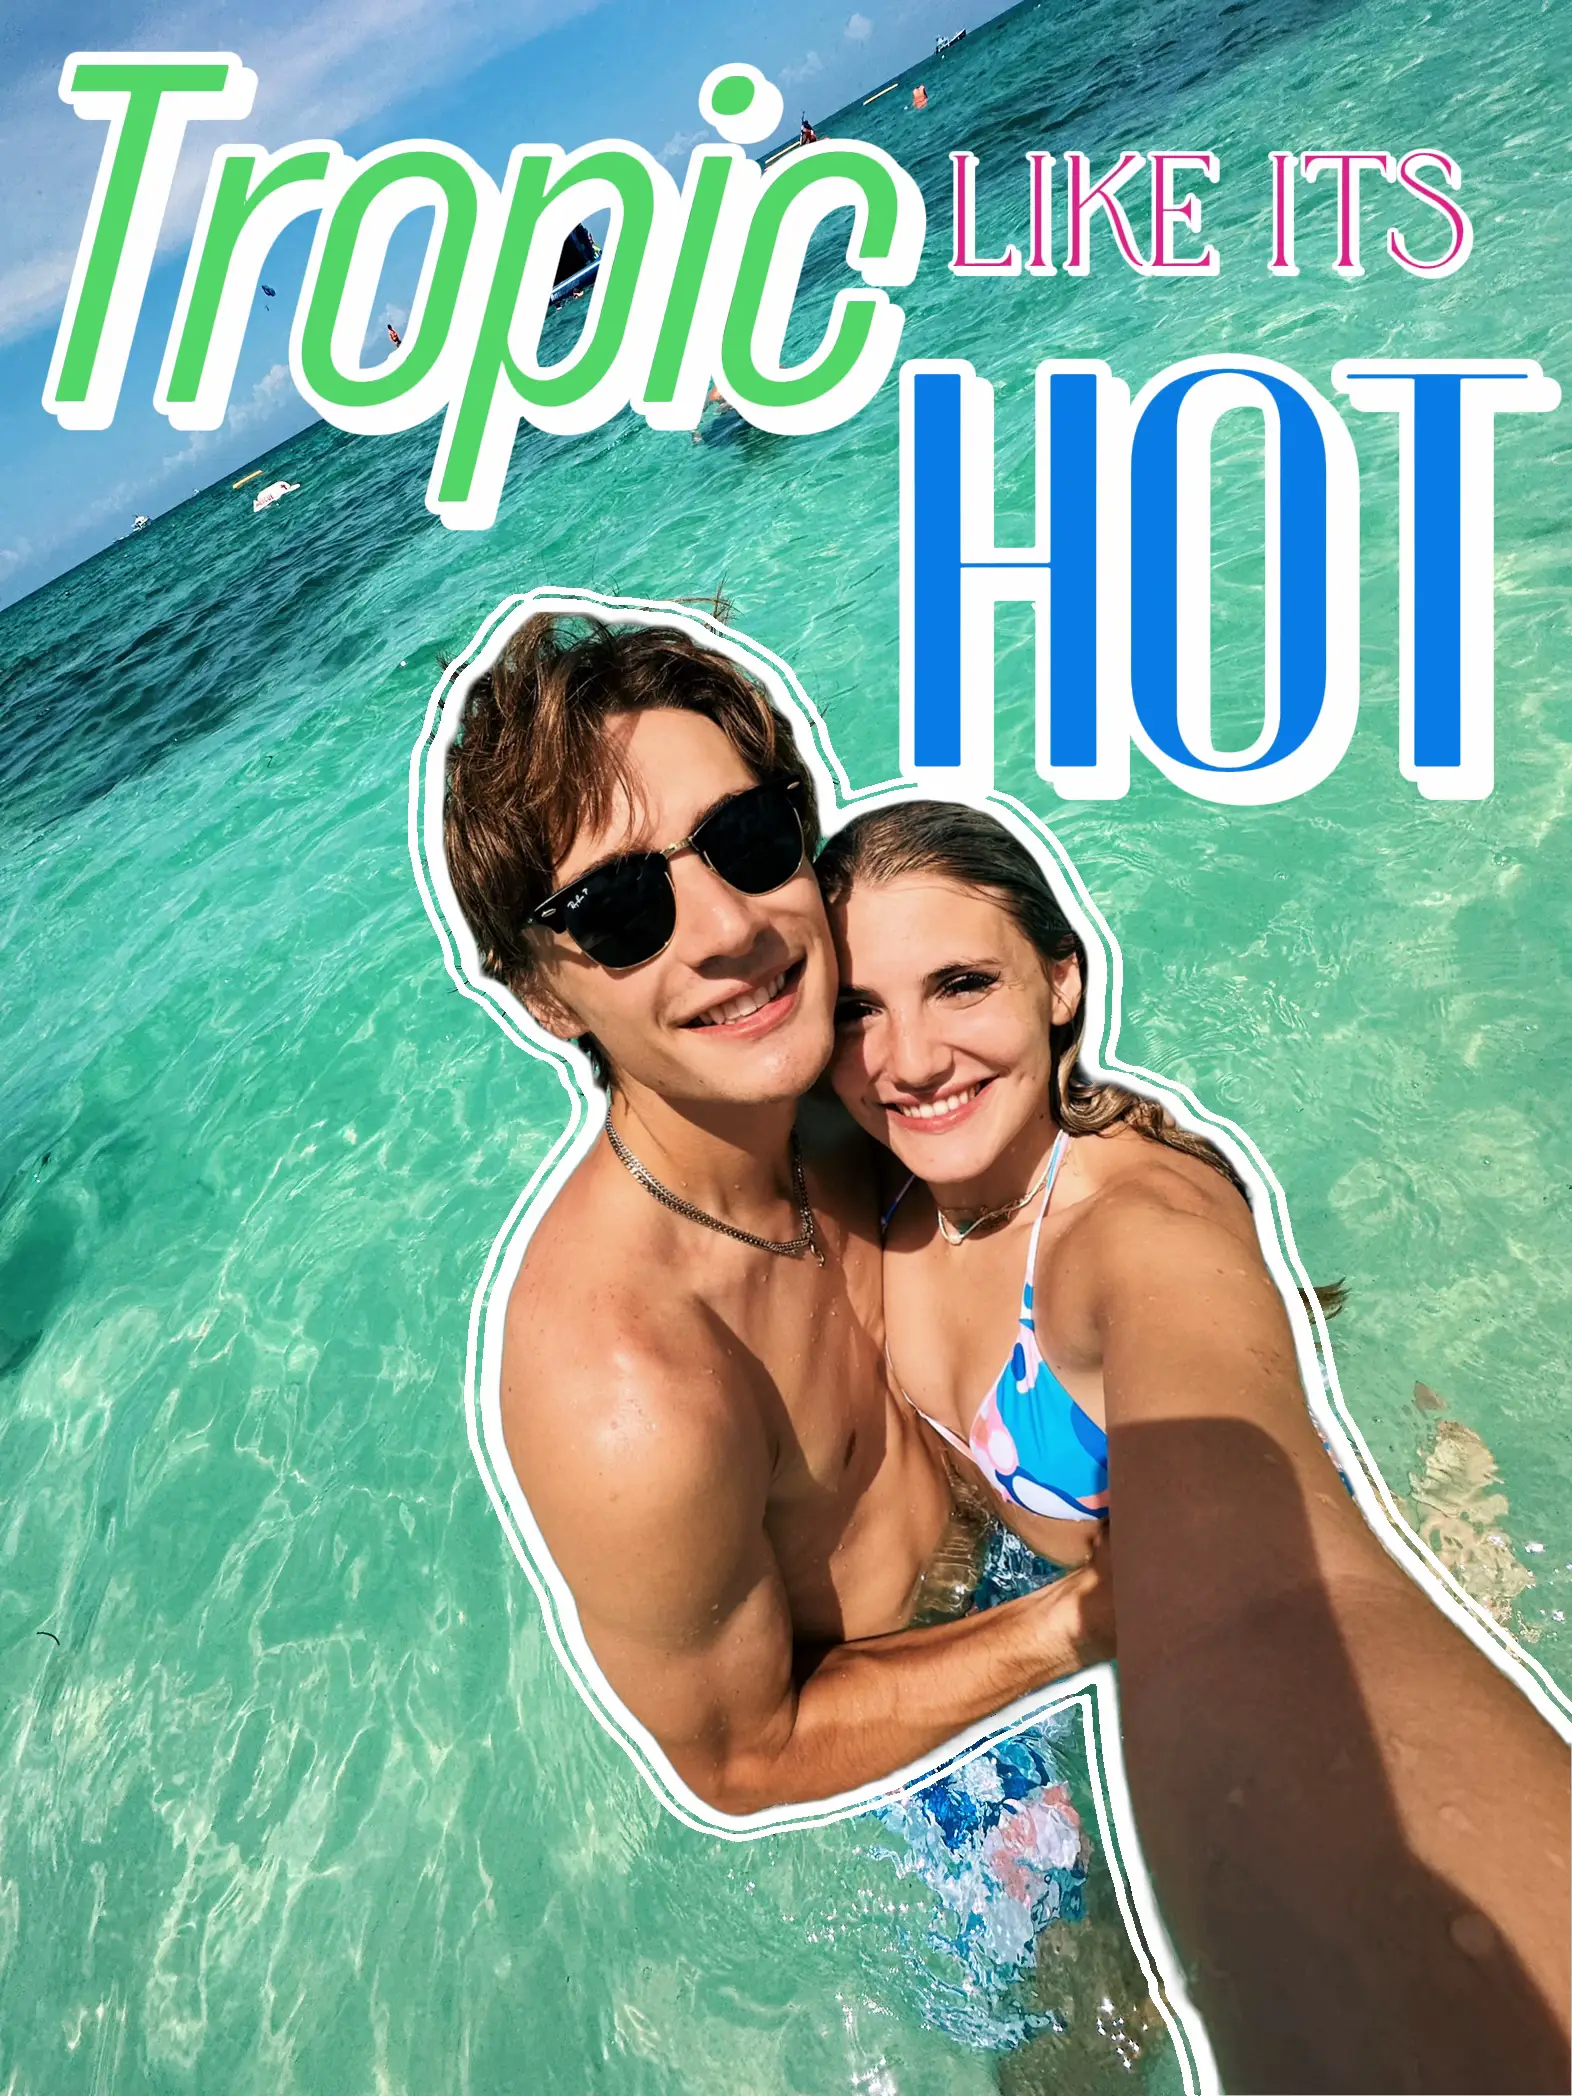  A man and a woman are standing in the water, smiling and enjoying their time. The woman is holding the man, and they are both wearing sunglasses. The man is wearing a blue swimsuit, and the woman is wearing